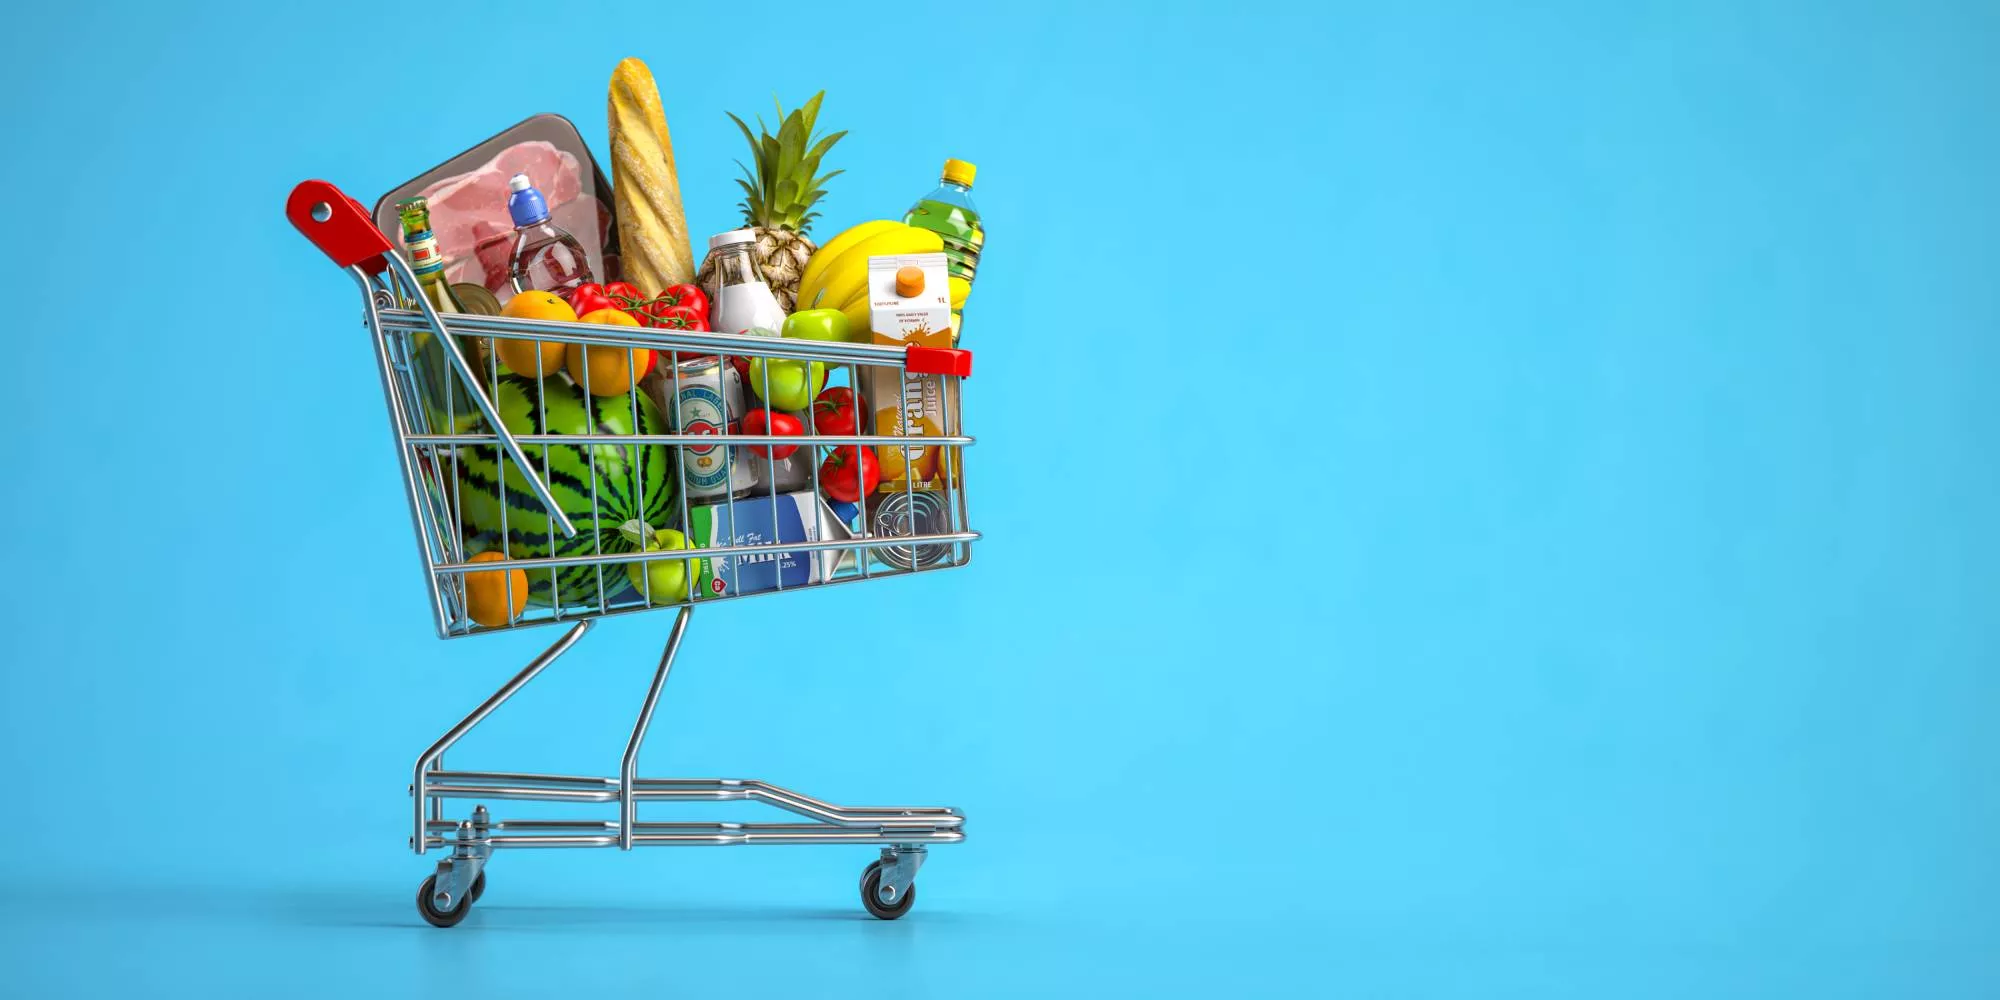 shopping cart full of fruits and vegetables bought at stores that accept EBT against blue background